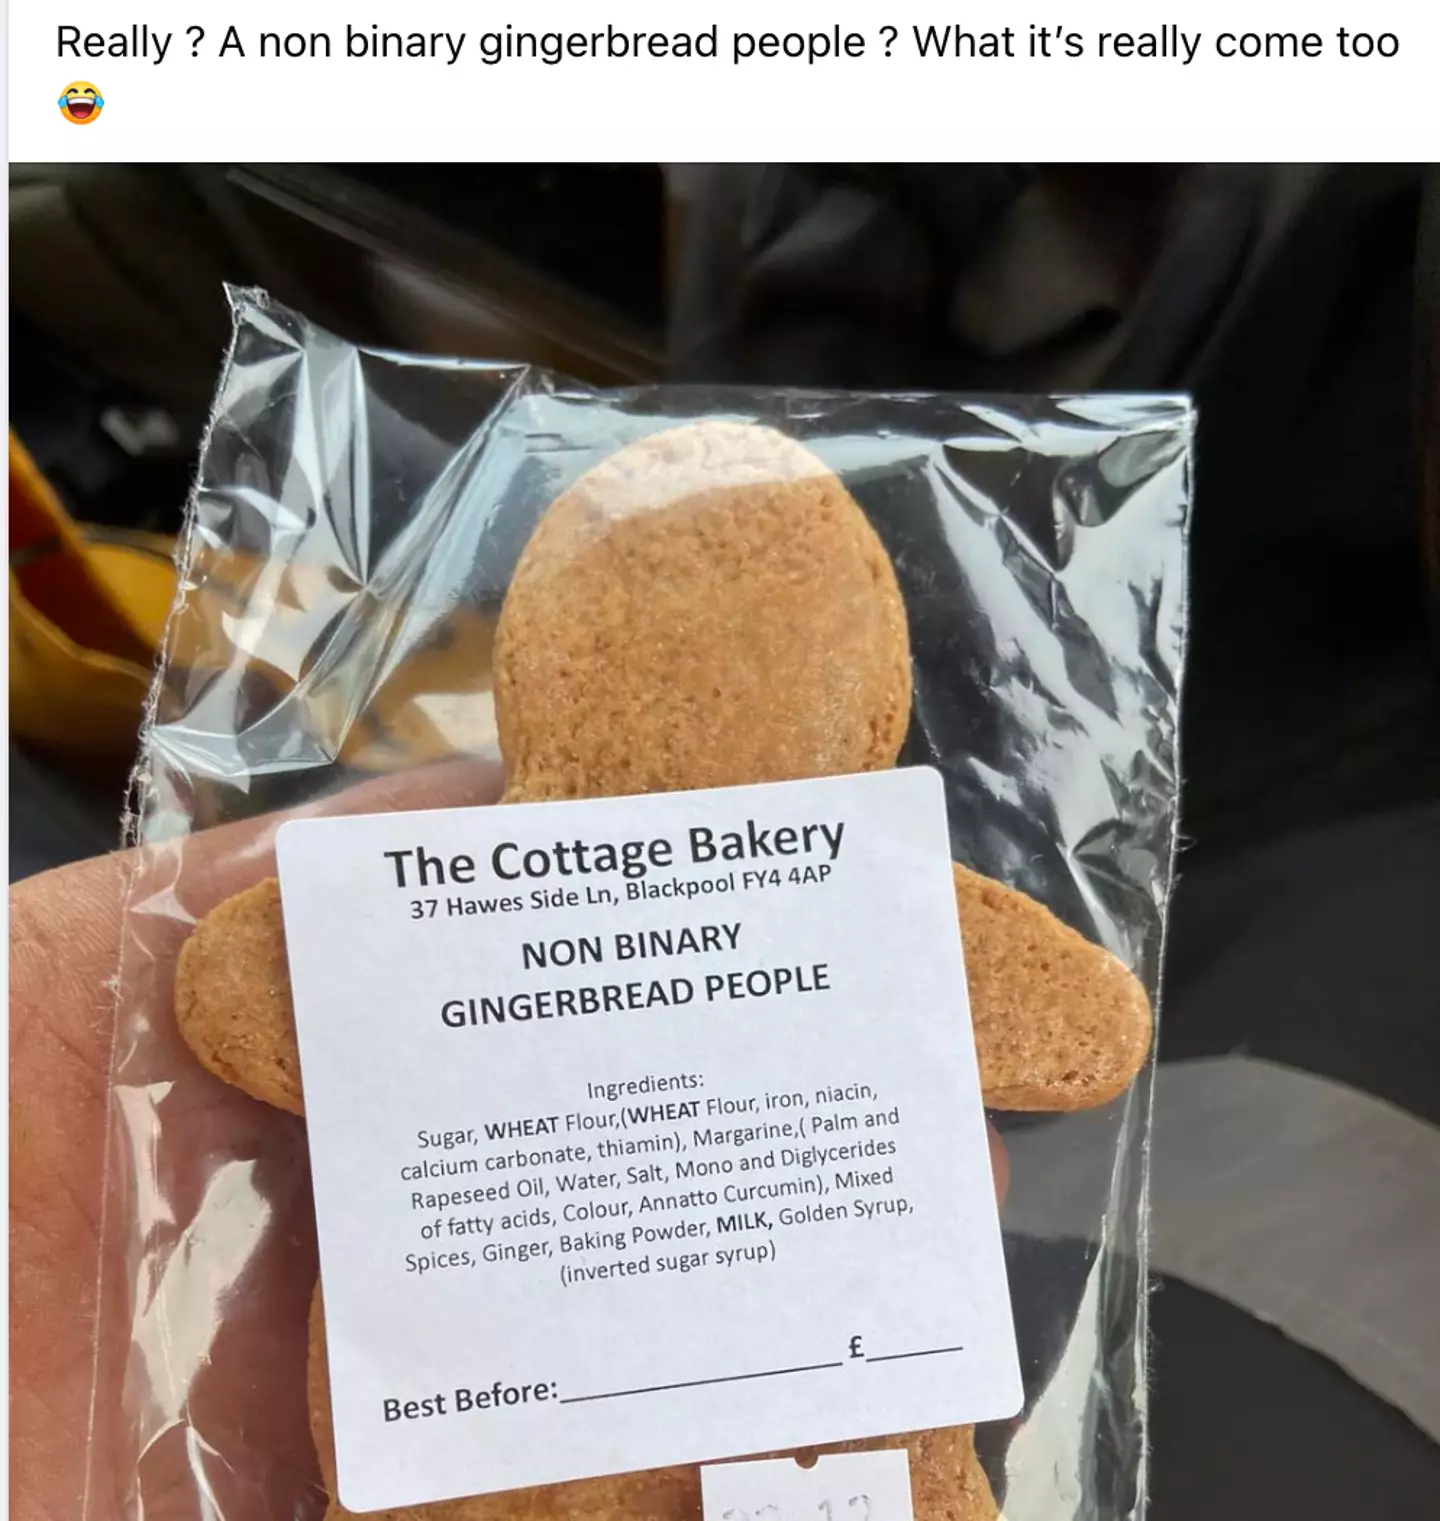 An image of the gingerbread person was shared on Facebook.